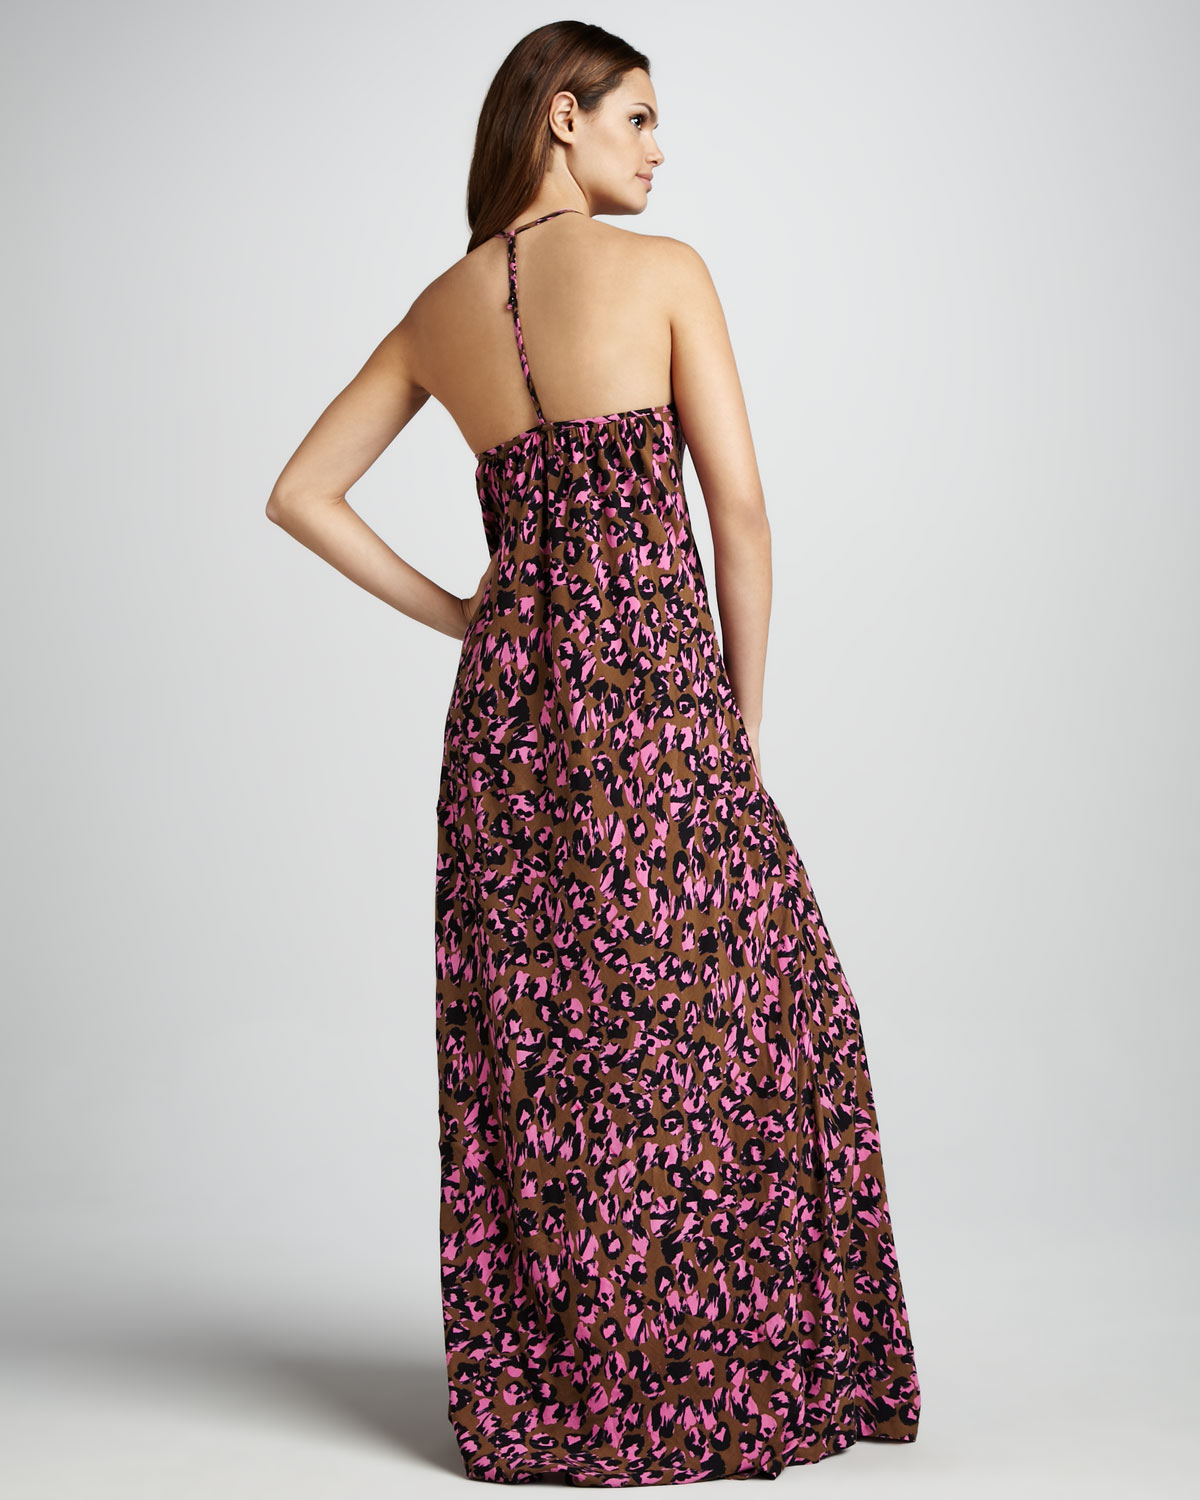 Camilla & marc Pablo Animal-Print Cover-Up Maxi Dress in Pink | Lyst